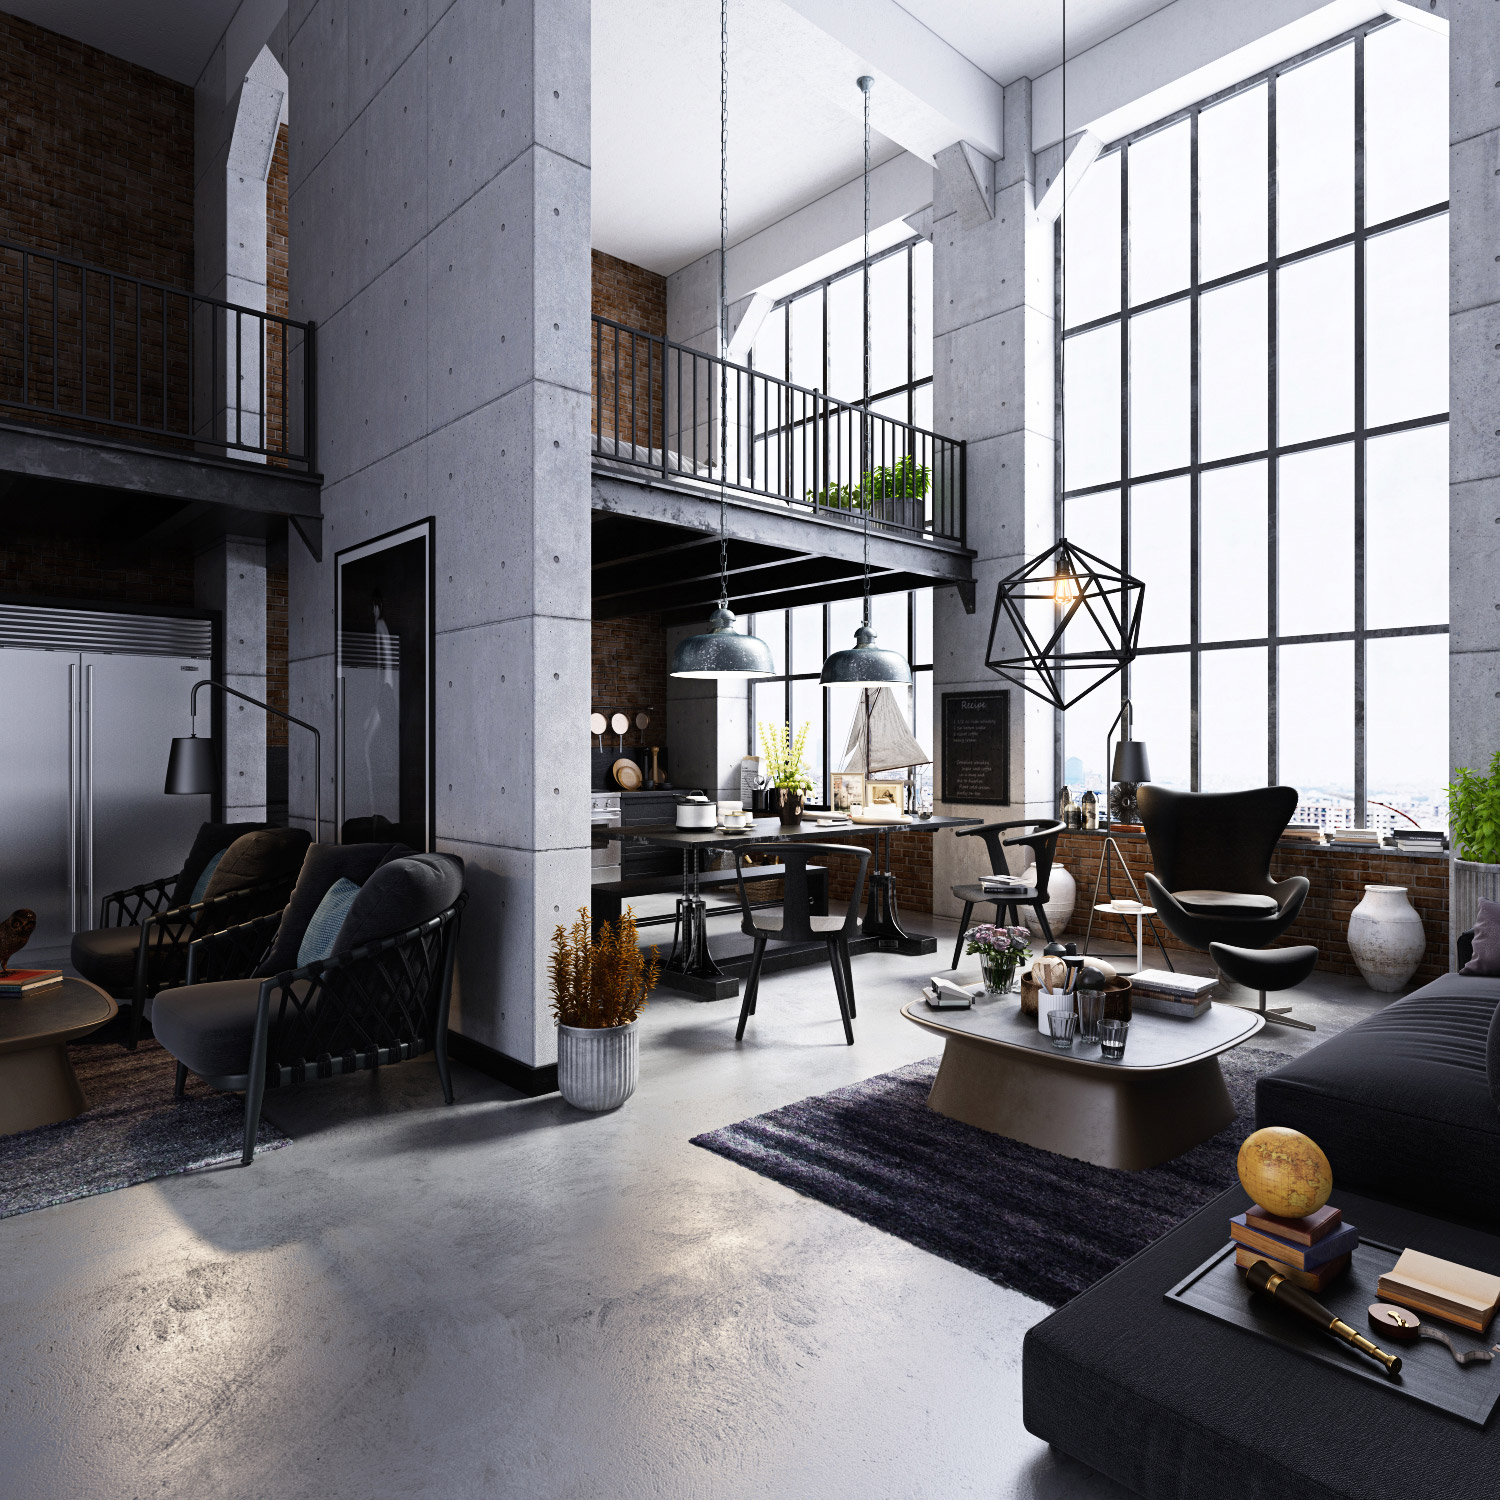 Industrial Style Studio Apartment: A Modern Haven Of Refined Industrial Charm